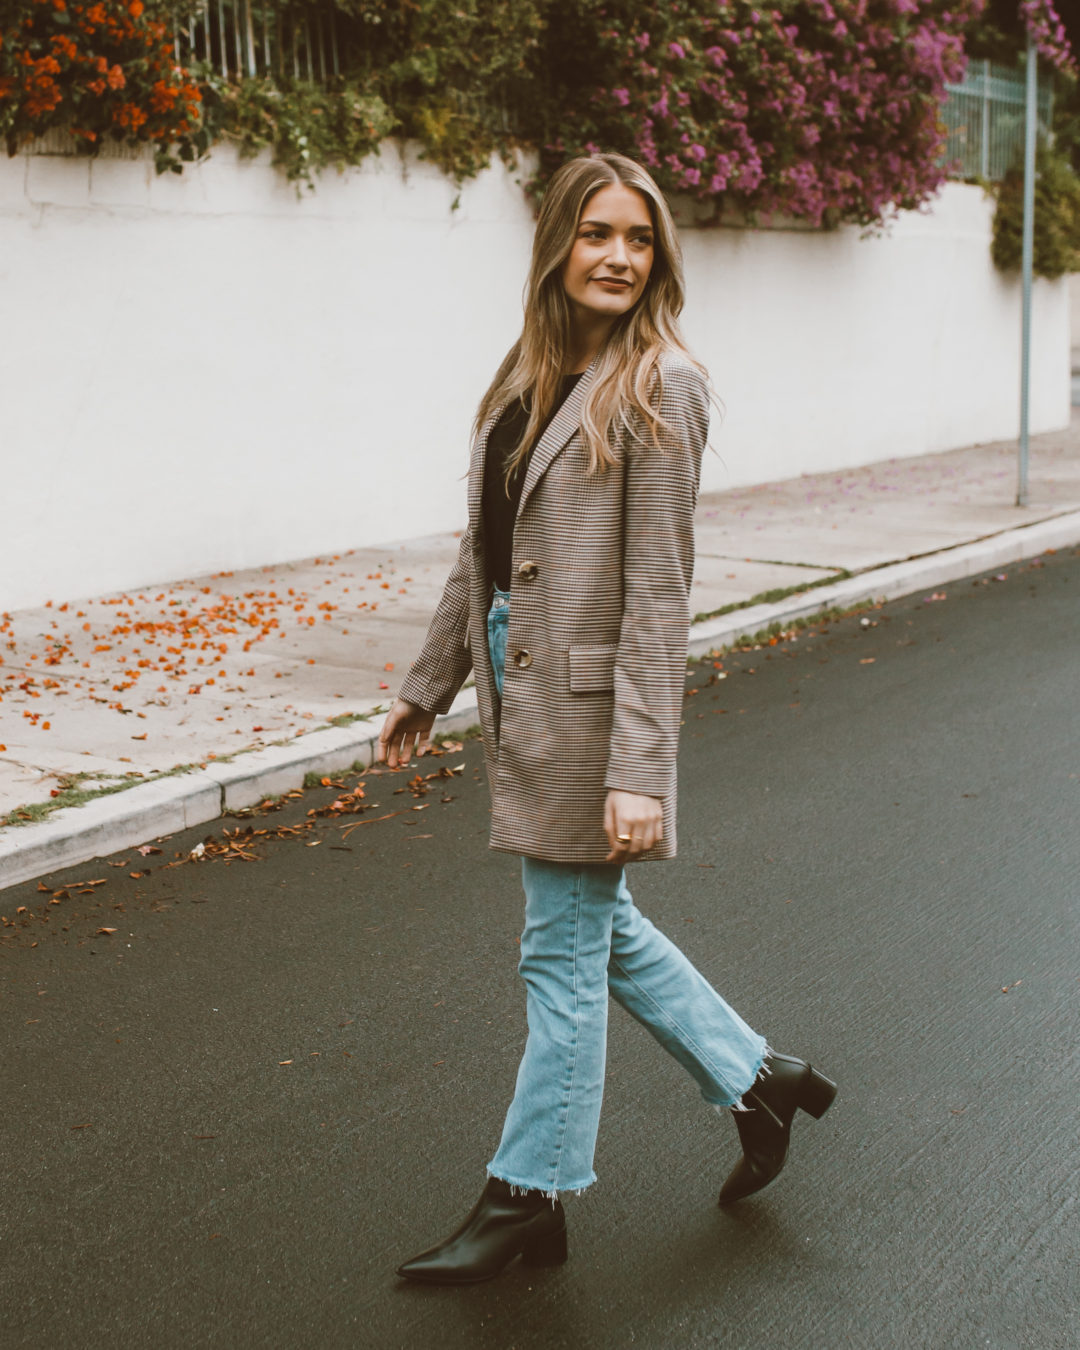 Must-Have Leather Boots | Twinspiration